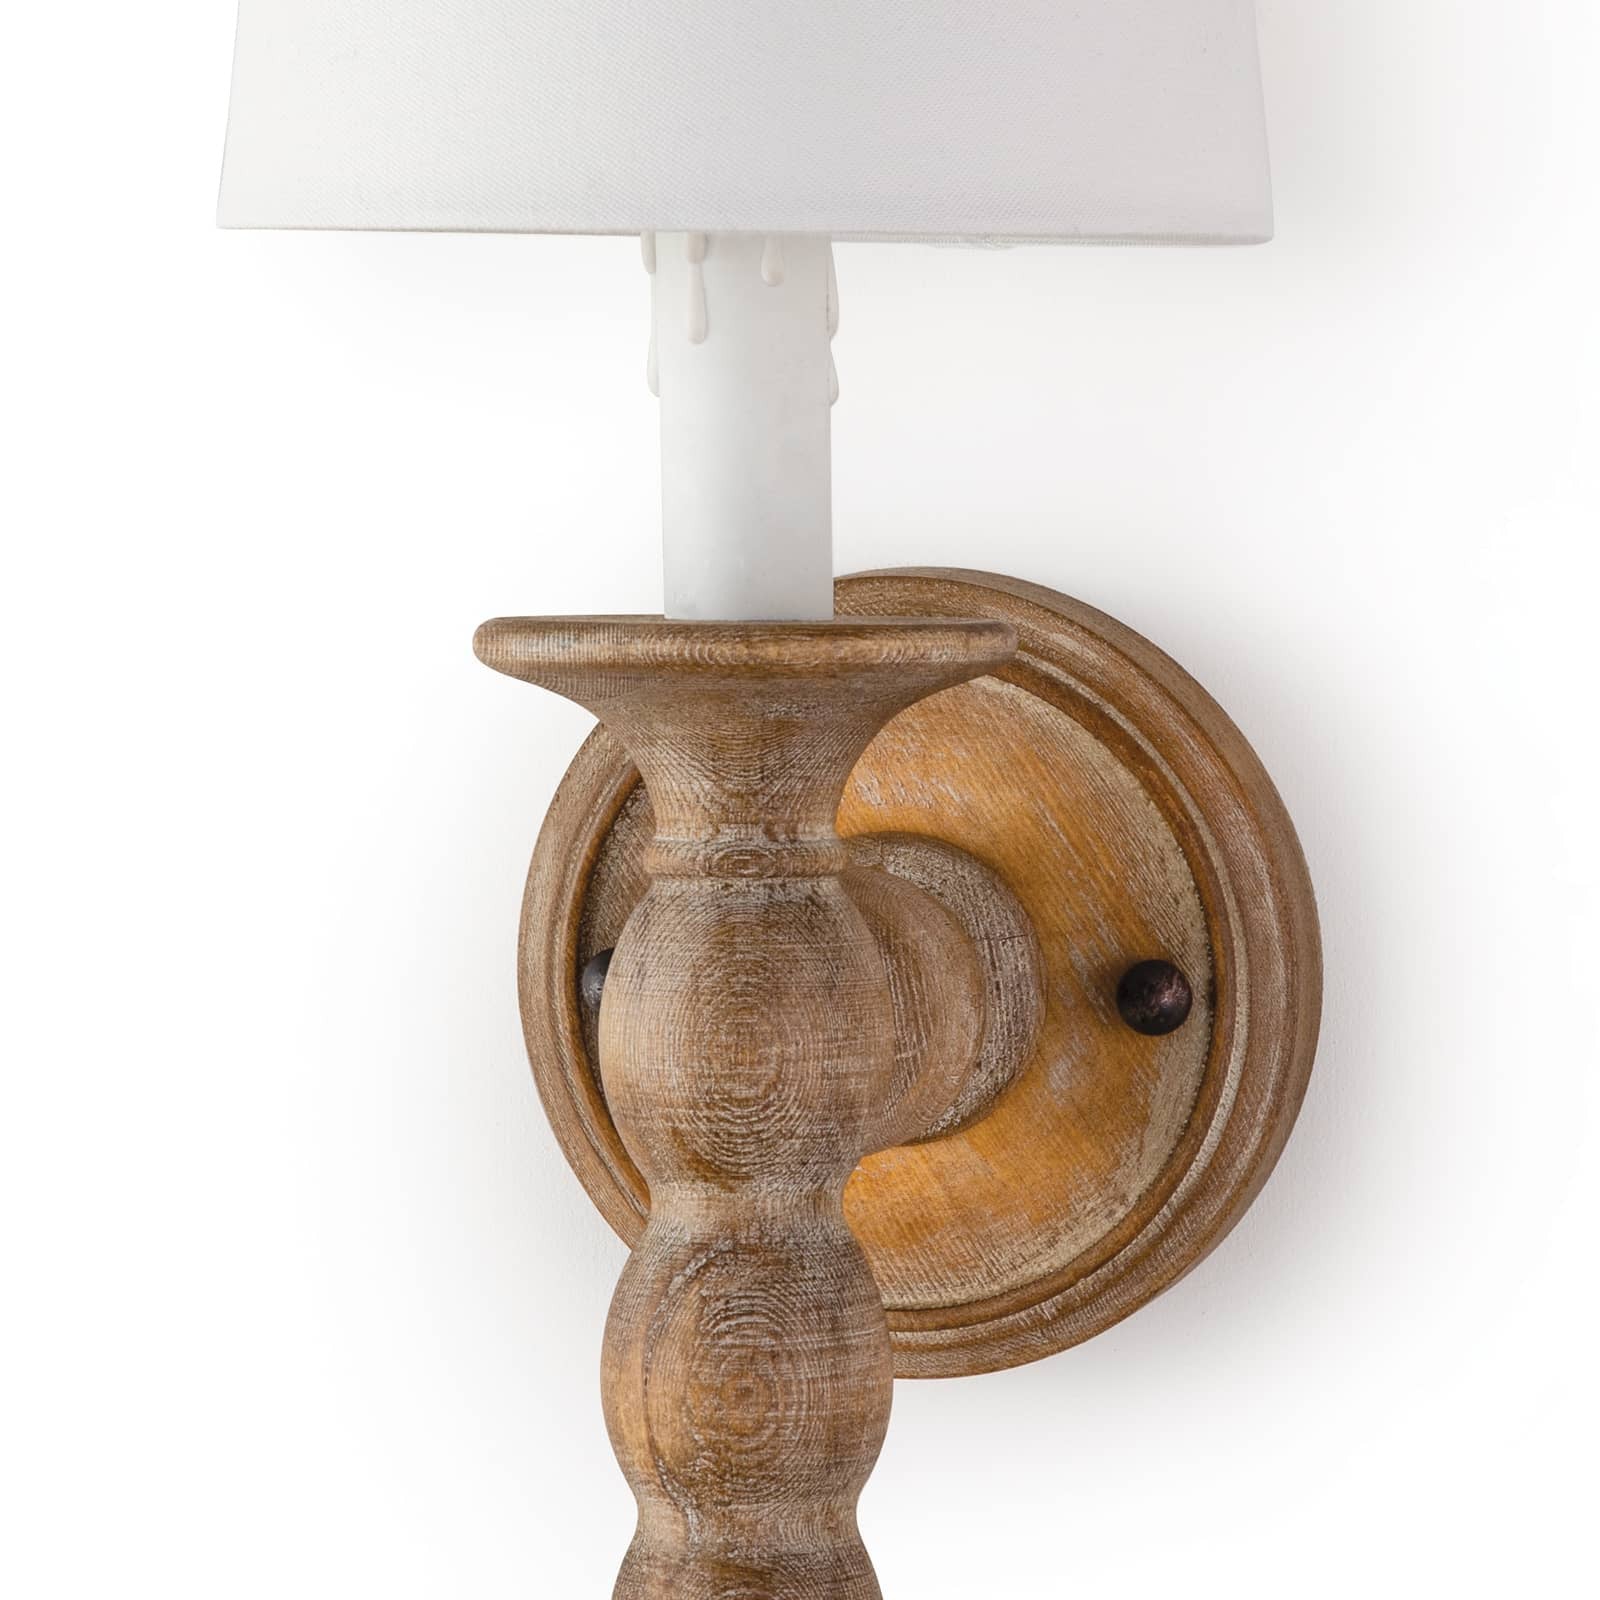 This Perennial Sconce - Natural is hand lathed from solid wood and distressed for a rustic chic effect. The added faux drip wax details on the candle sleeves add to the charm and relaxed coastal style to any living room, bedroom, or other space.   Overall Dimensions: 6"w x 7"d x 19"h